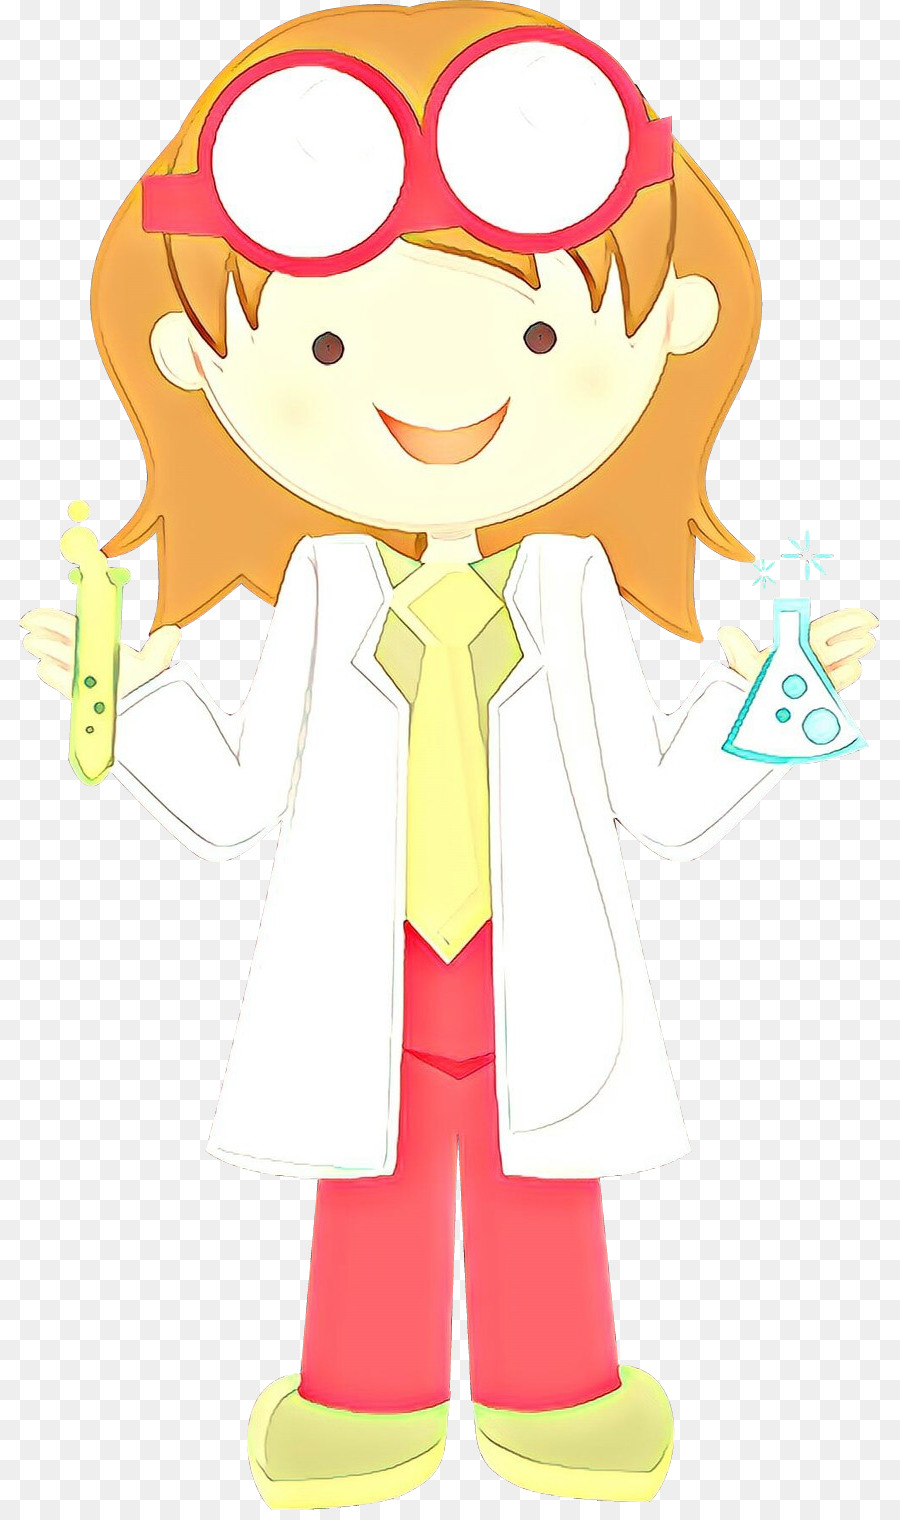 Clip art Science Free content Scientist Foot and Ankle -  png download - 861*1510 - Free Transparent Science png Download.